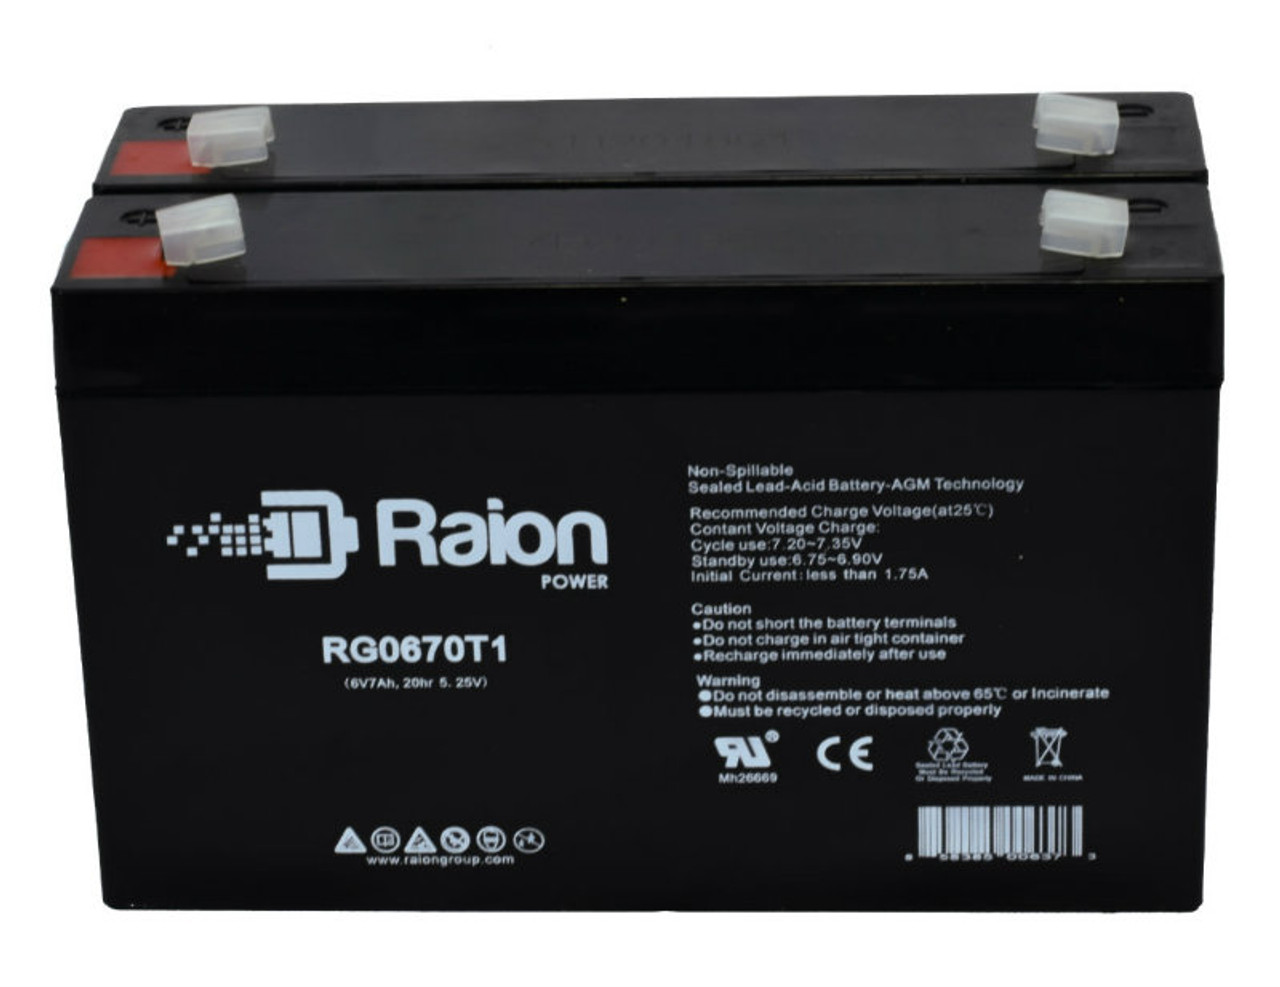 Raion Power RG0670T1 6V 7Ah Replacement Emergency Light Battery for Dual-Lite LM36CH - 2 Pack